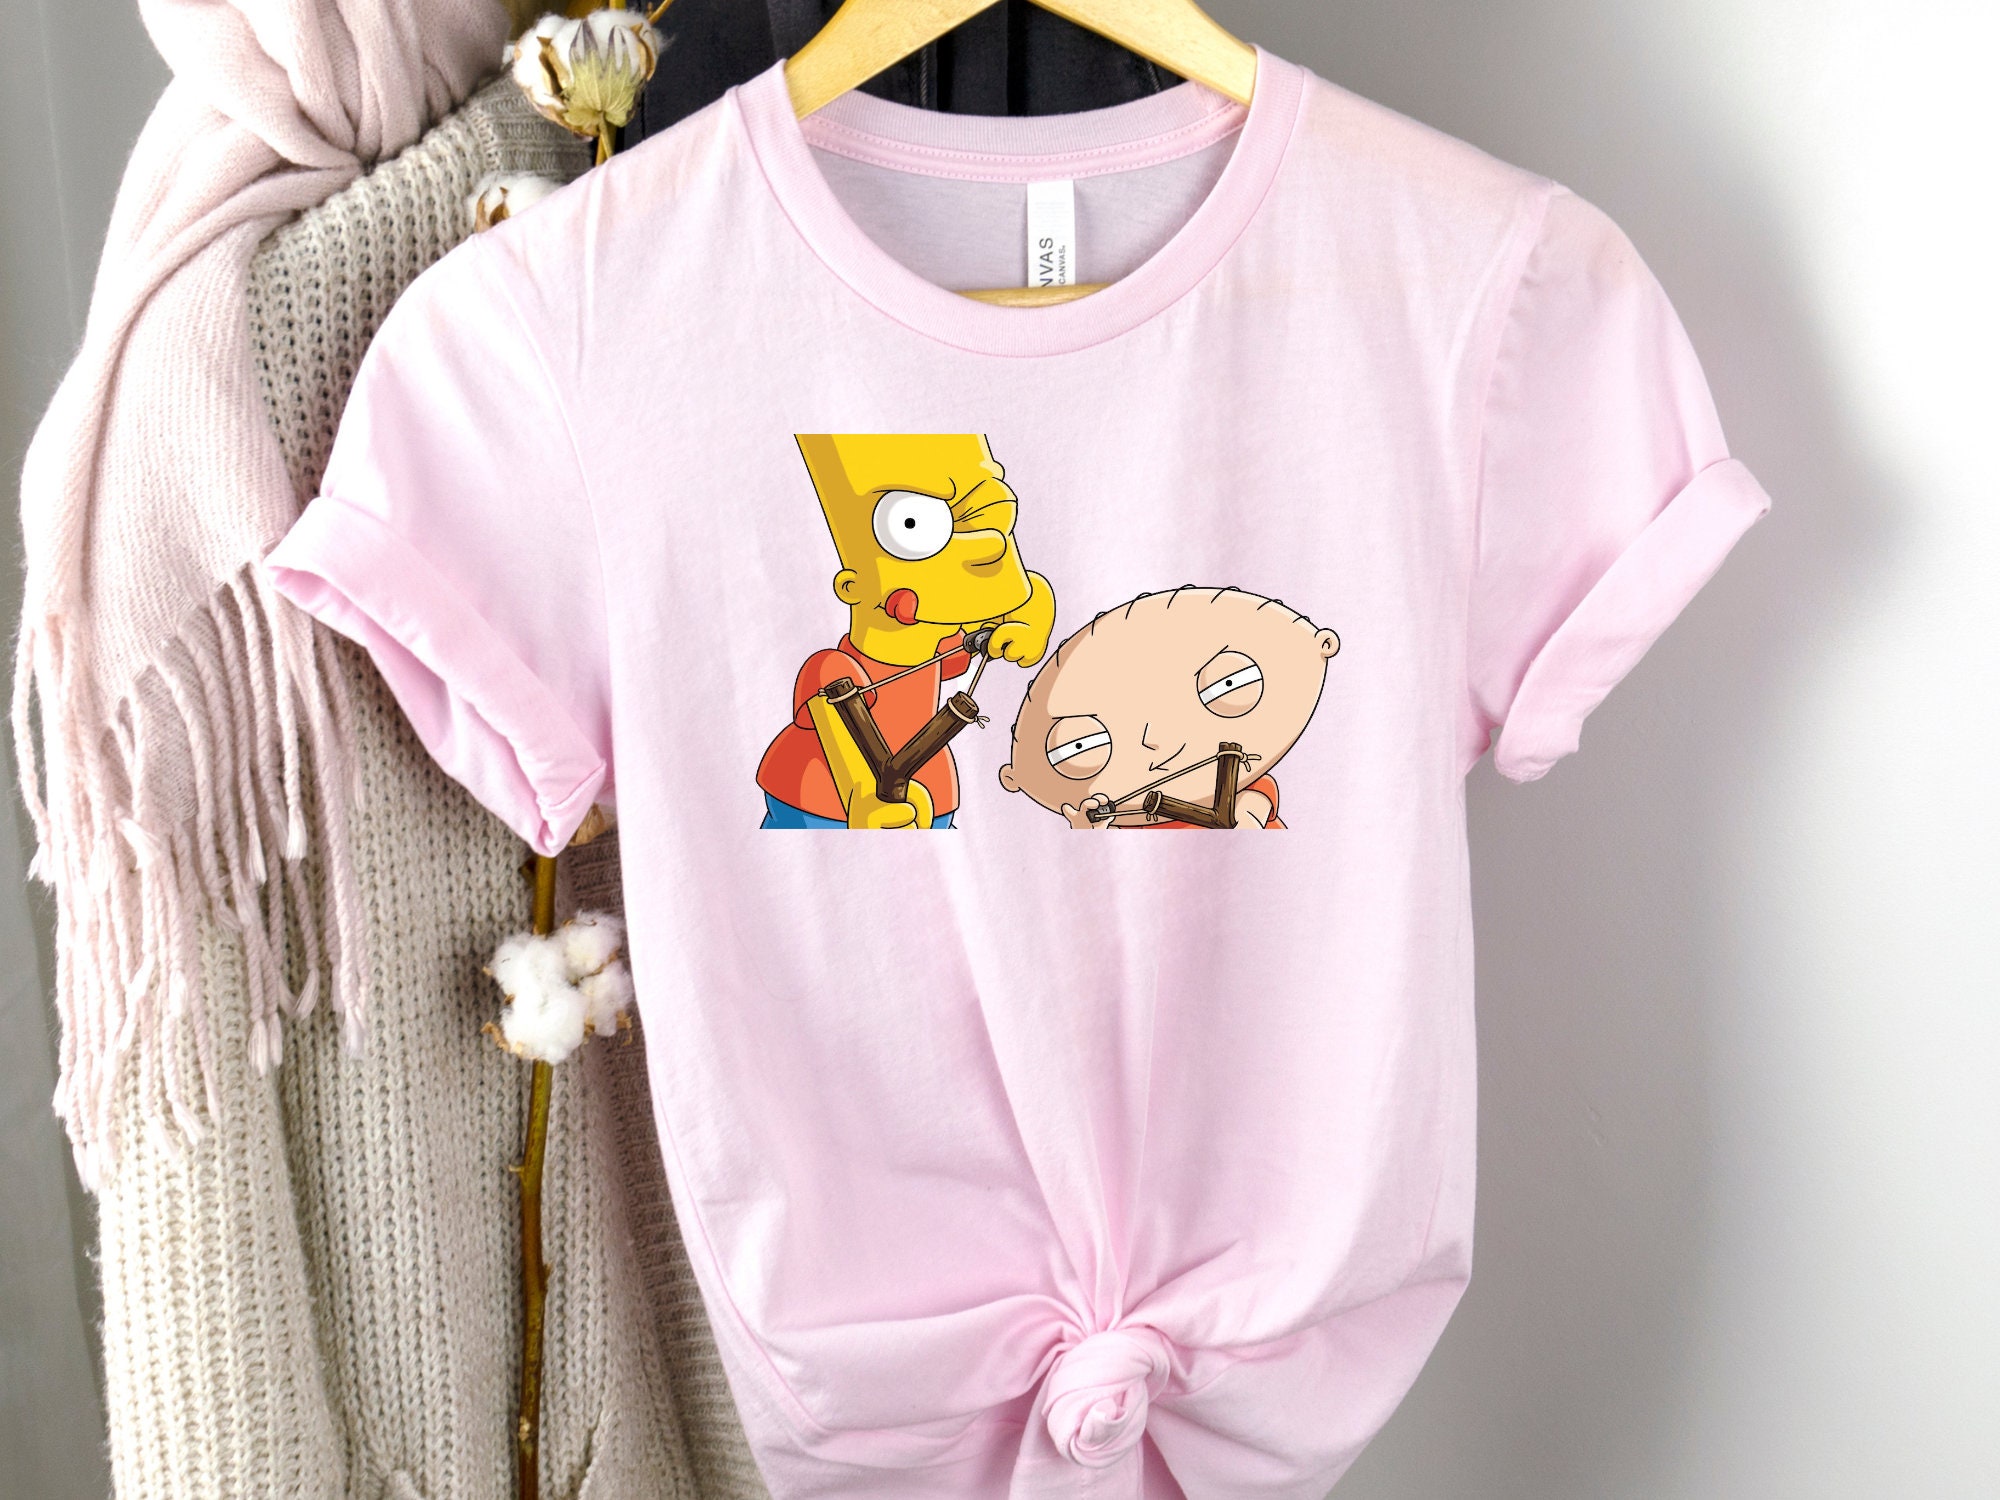 Discover T-shirt, The Simpsons Shortsleeve Summer Shirt, Funny Summer Gift T-shirt, Gift for Birthday, Gift for Kids, Toddler and Youth Shirt, Family